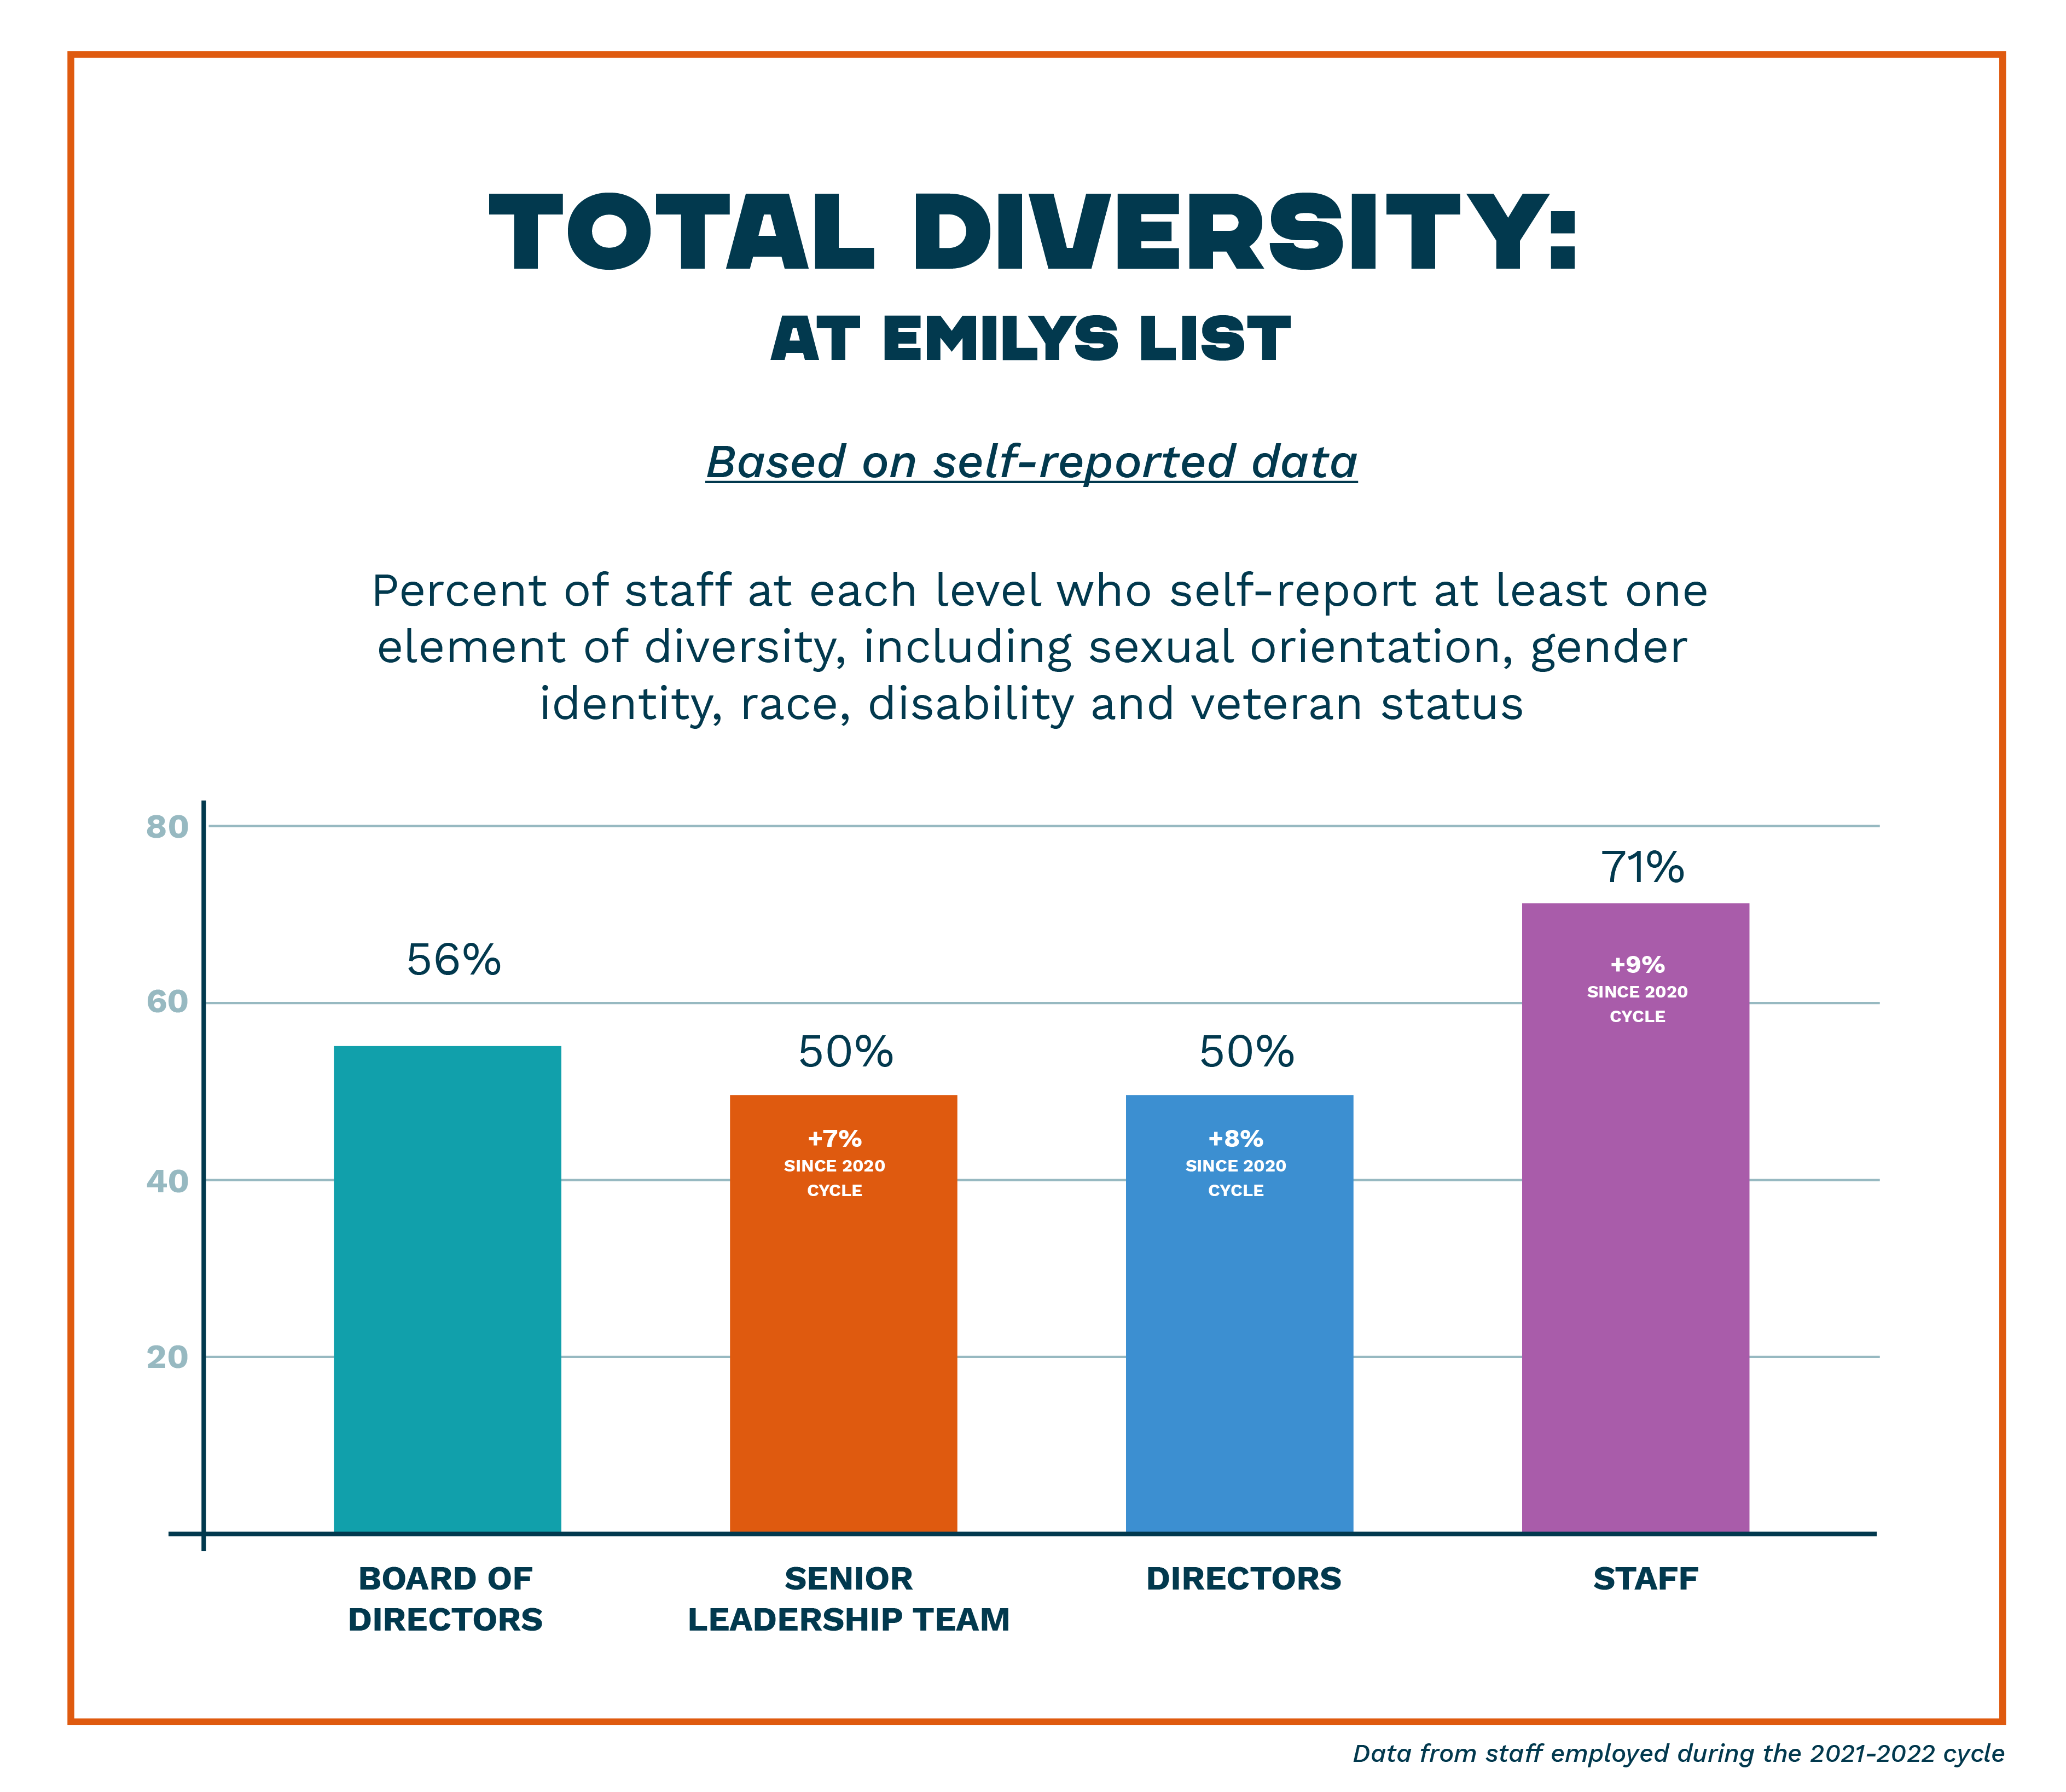 Total Diversity: at EMILYs List - Based on self-reported data - Percent of staff at each level who self-report at least one element of diversity, including sexual orientation, gender identity, race, disability, and veteran status - Board of Directors 56%, Senior Leadership Team 50% (7% increase since 2020 cycle), Directors 50% (8% increase since 2020 cycle), Staff 71% (9% increase since 2020 cycle) - Data from staff employed during the 2021-2022 cycle